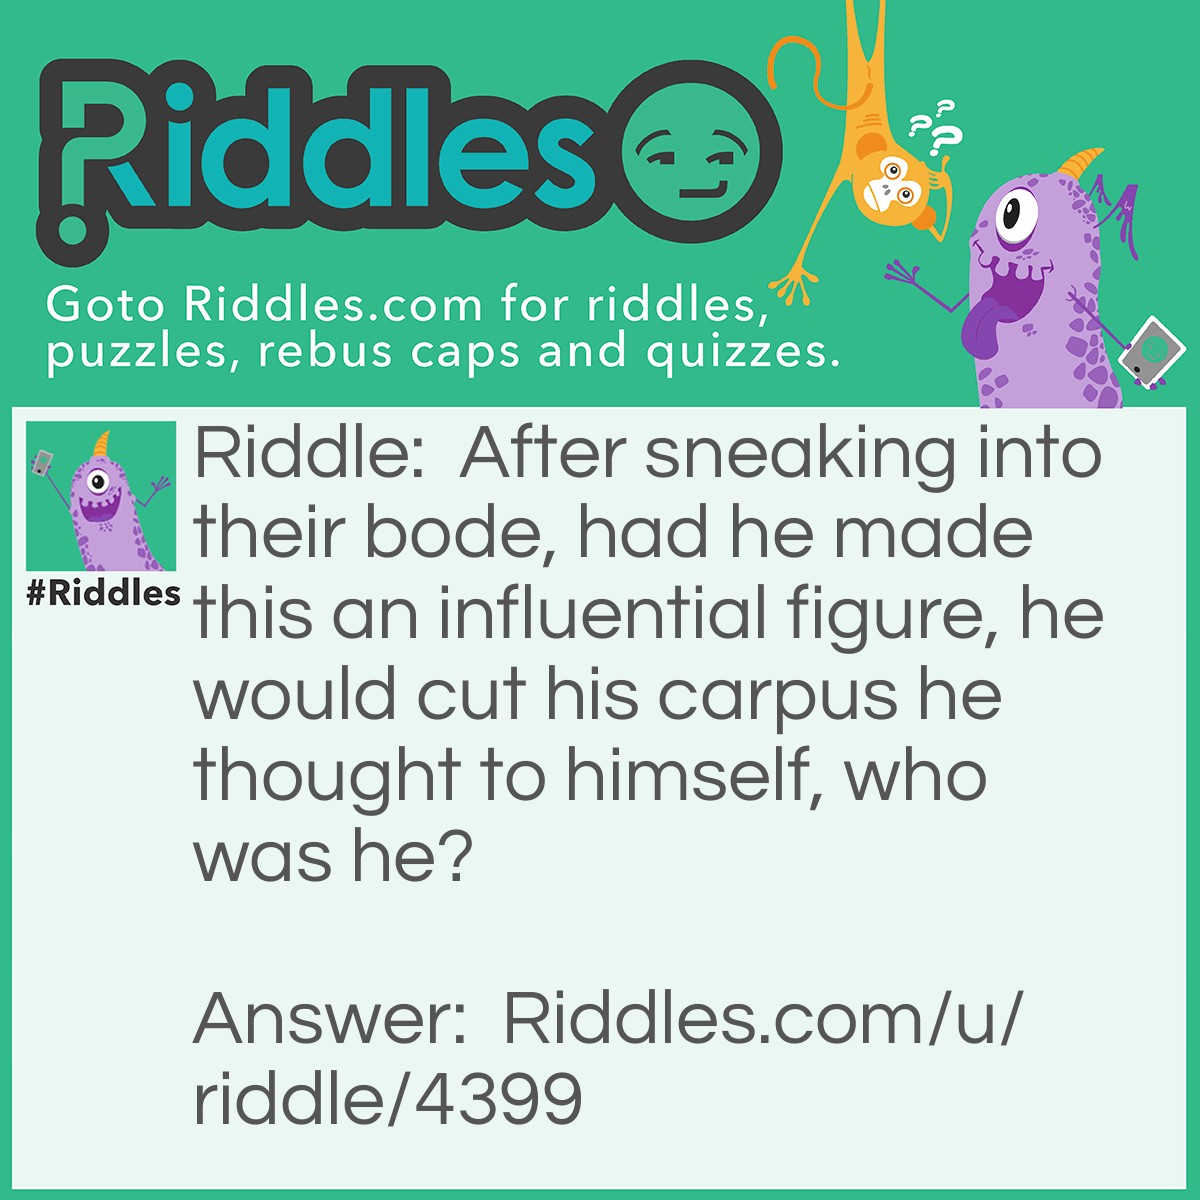 Riddle: After sneaking into their bode, had he made this an influential figure, he would cut his carpus he thought to himself, who was he? Answer: Not yet answered.